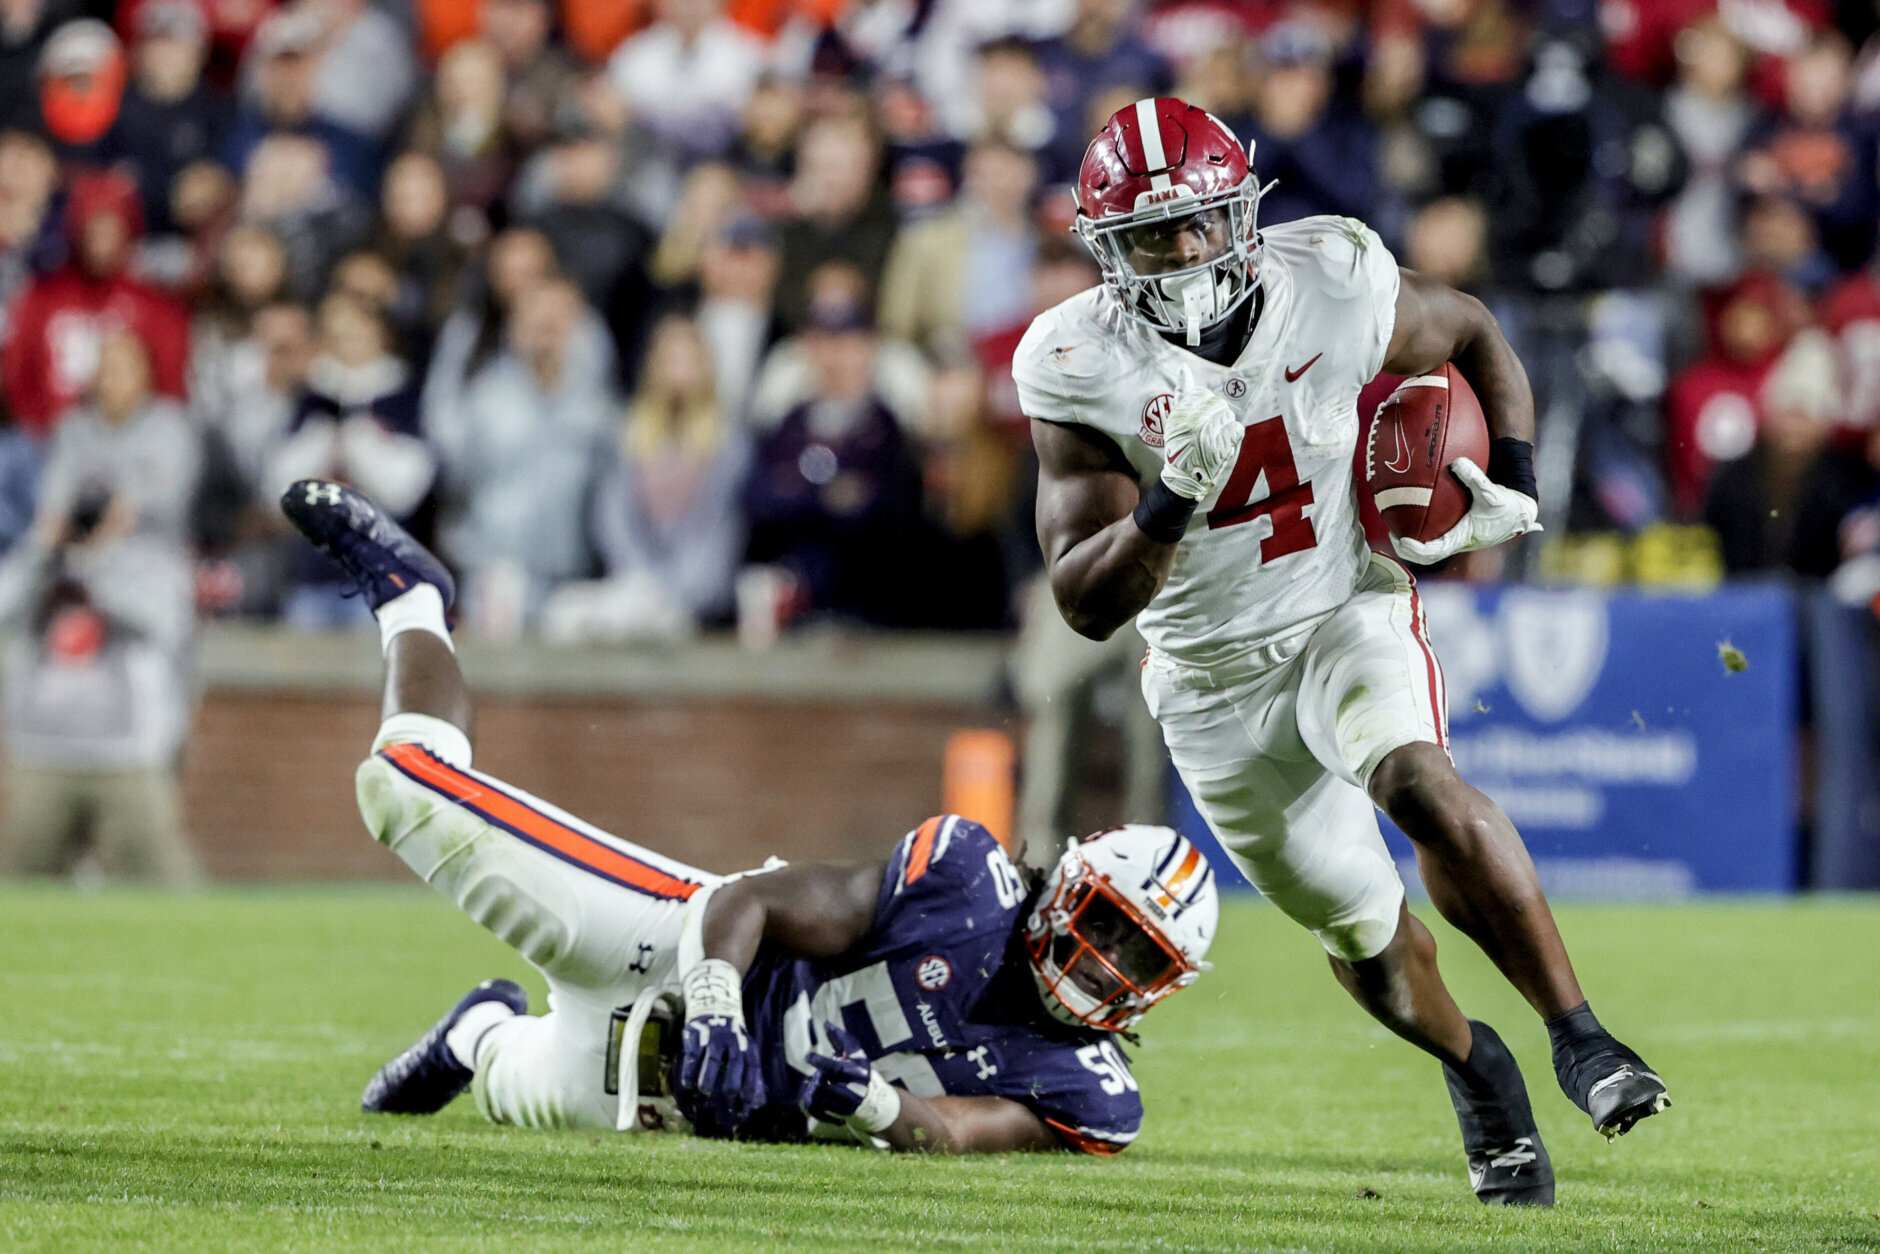 <h4>Round 3 (98th overall) — Brian Robinson Jr., RB Alabama</h4>
<p>Washington needed a big, physical runner to complement the shifty Antonio Gibson and they got one in Robinson. Much like Nick Chubb at Georgia, he waited his turn, made the most of his opportunity late in his college career and figures to be a steal as a big, bruiser out of the backfield in the pros that surprises some as a legit receiving threat.</p>
